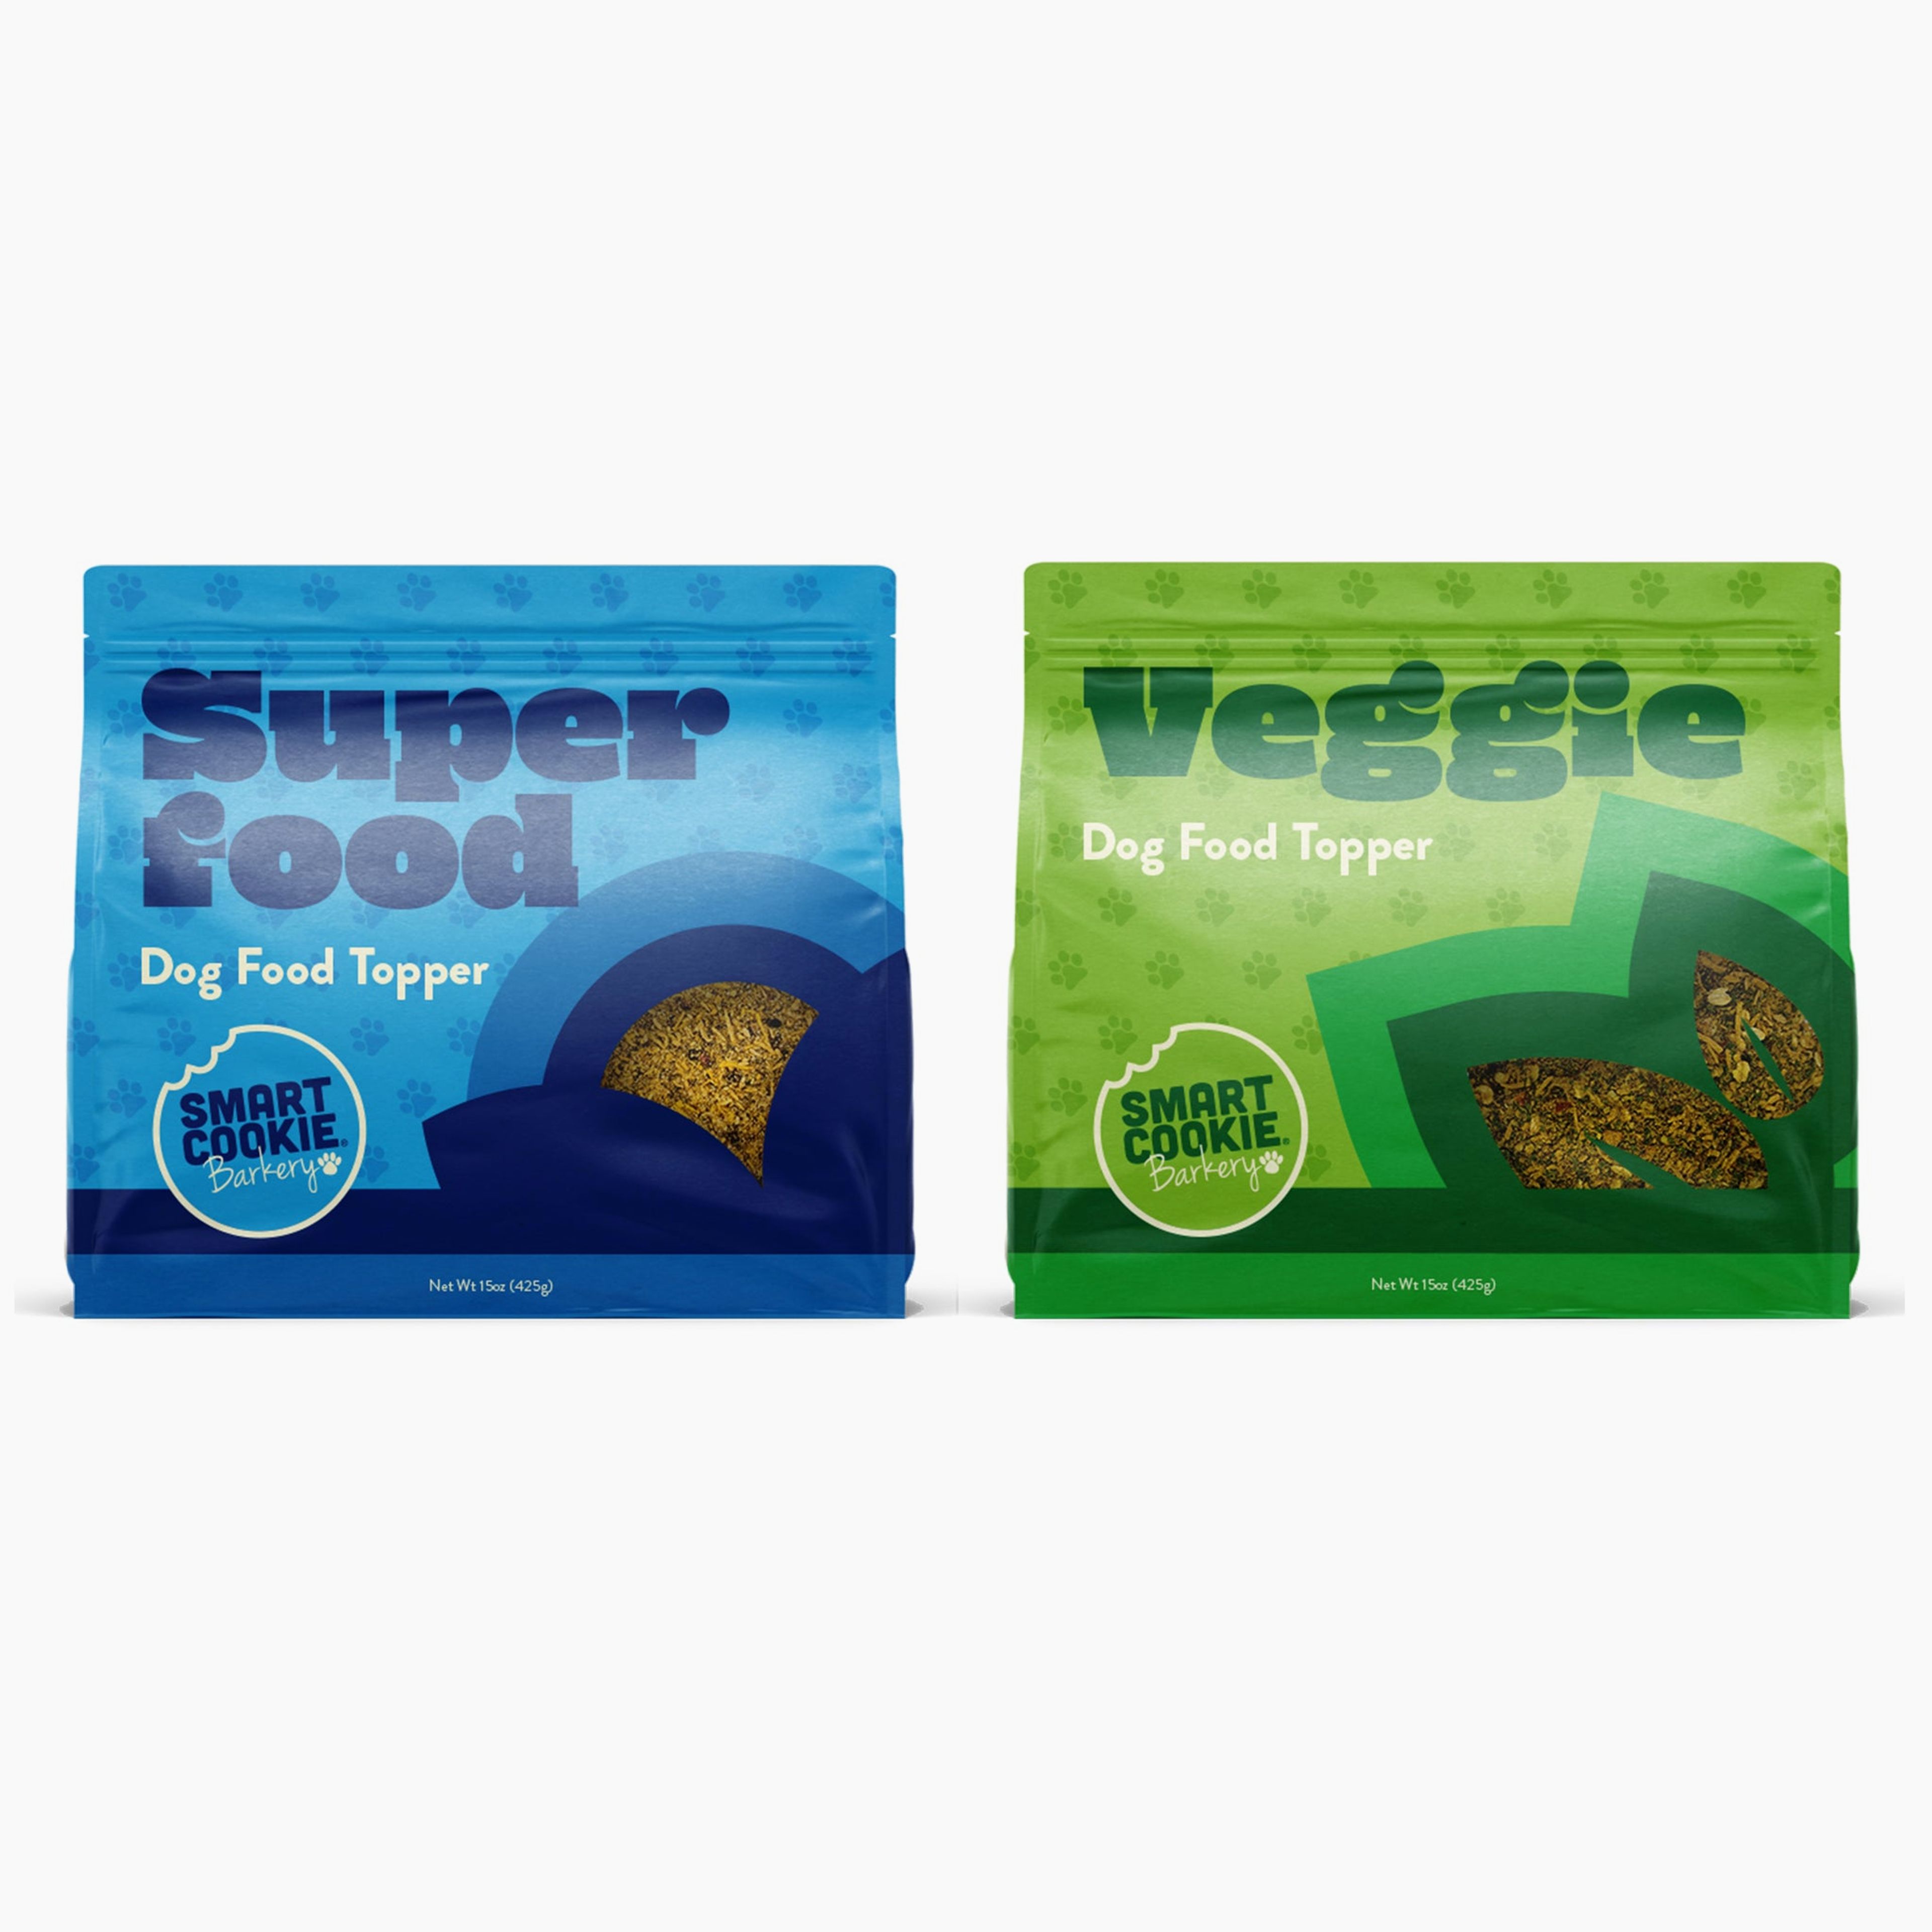 Veggie and Superfood Dog Food Topper Variety Pack